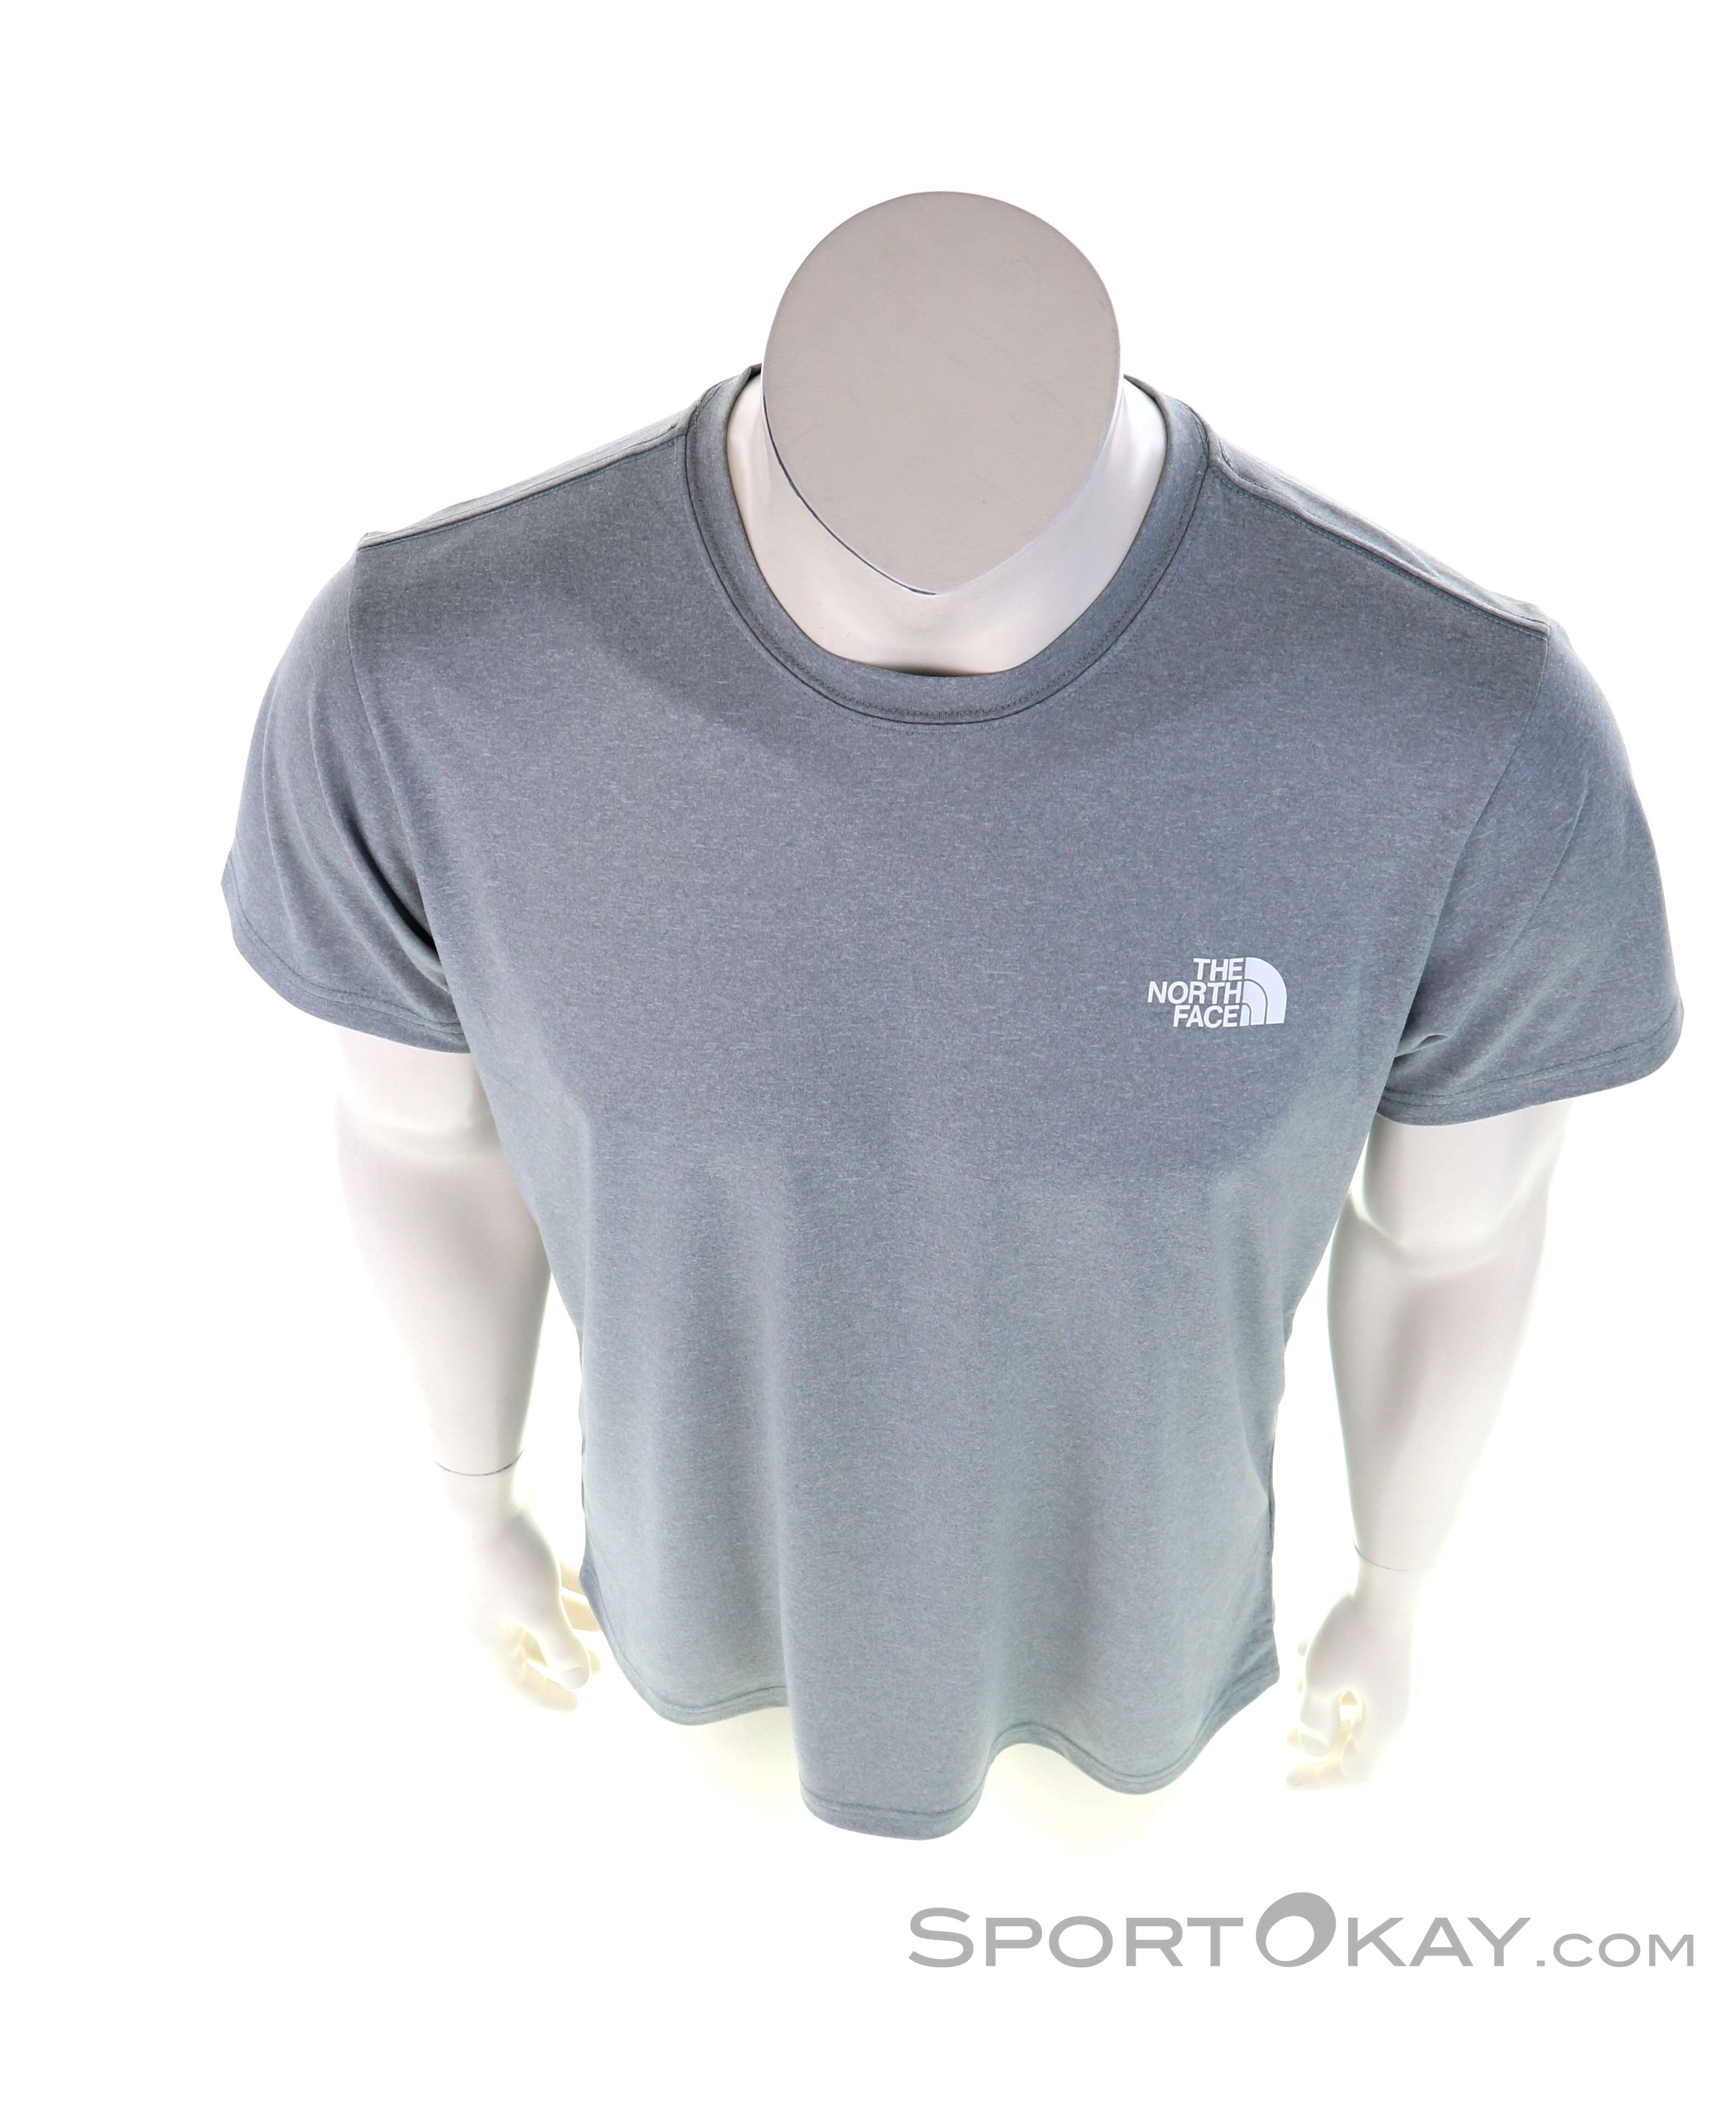 & Clothing - Fitness T-Shirt - North Shirts - - Reaxion T-Shirts The All Tee Fitness Mens Face Box